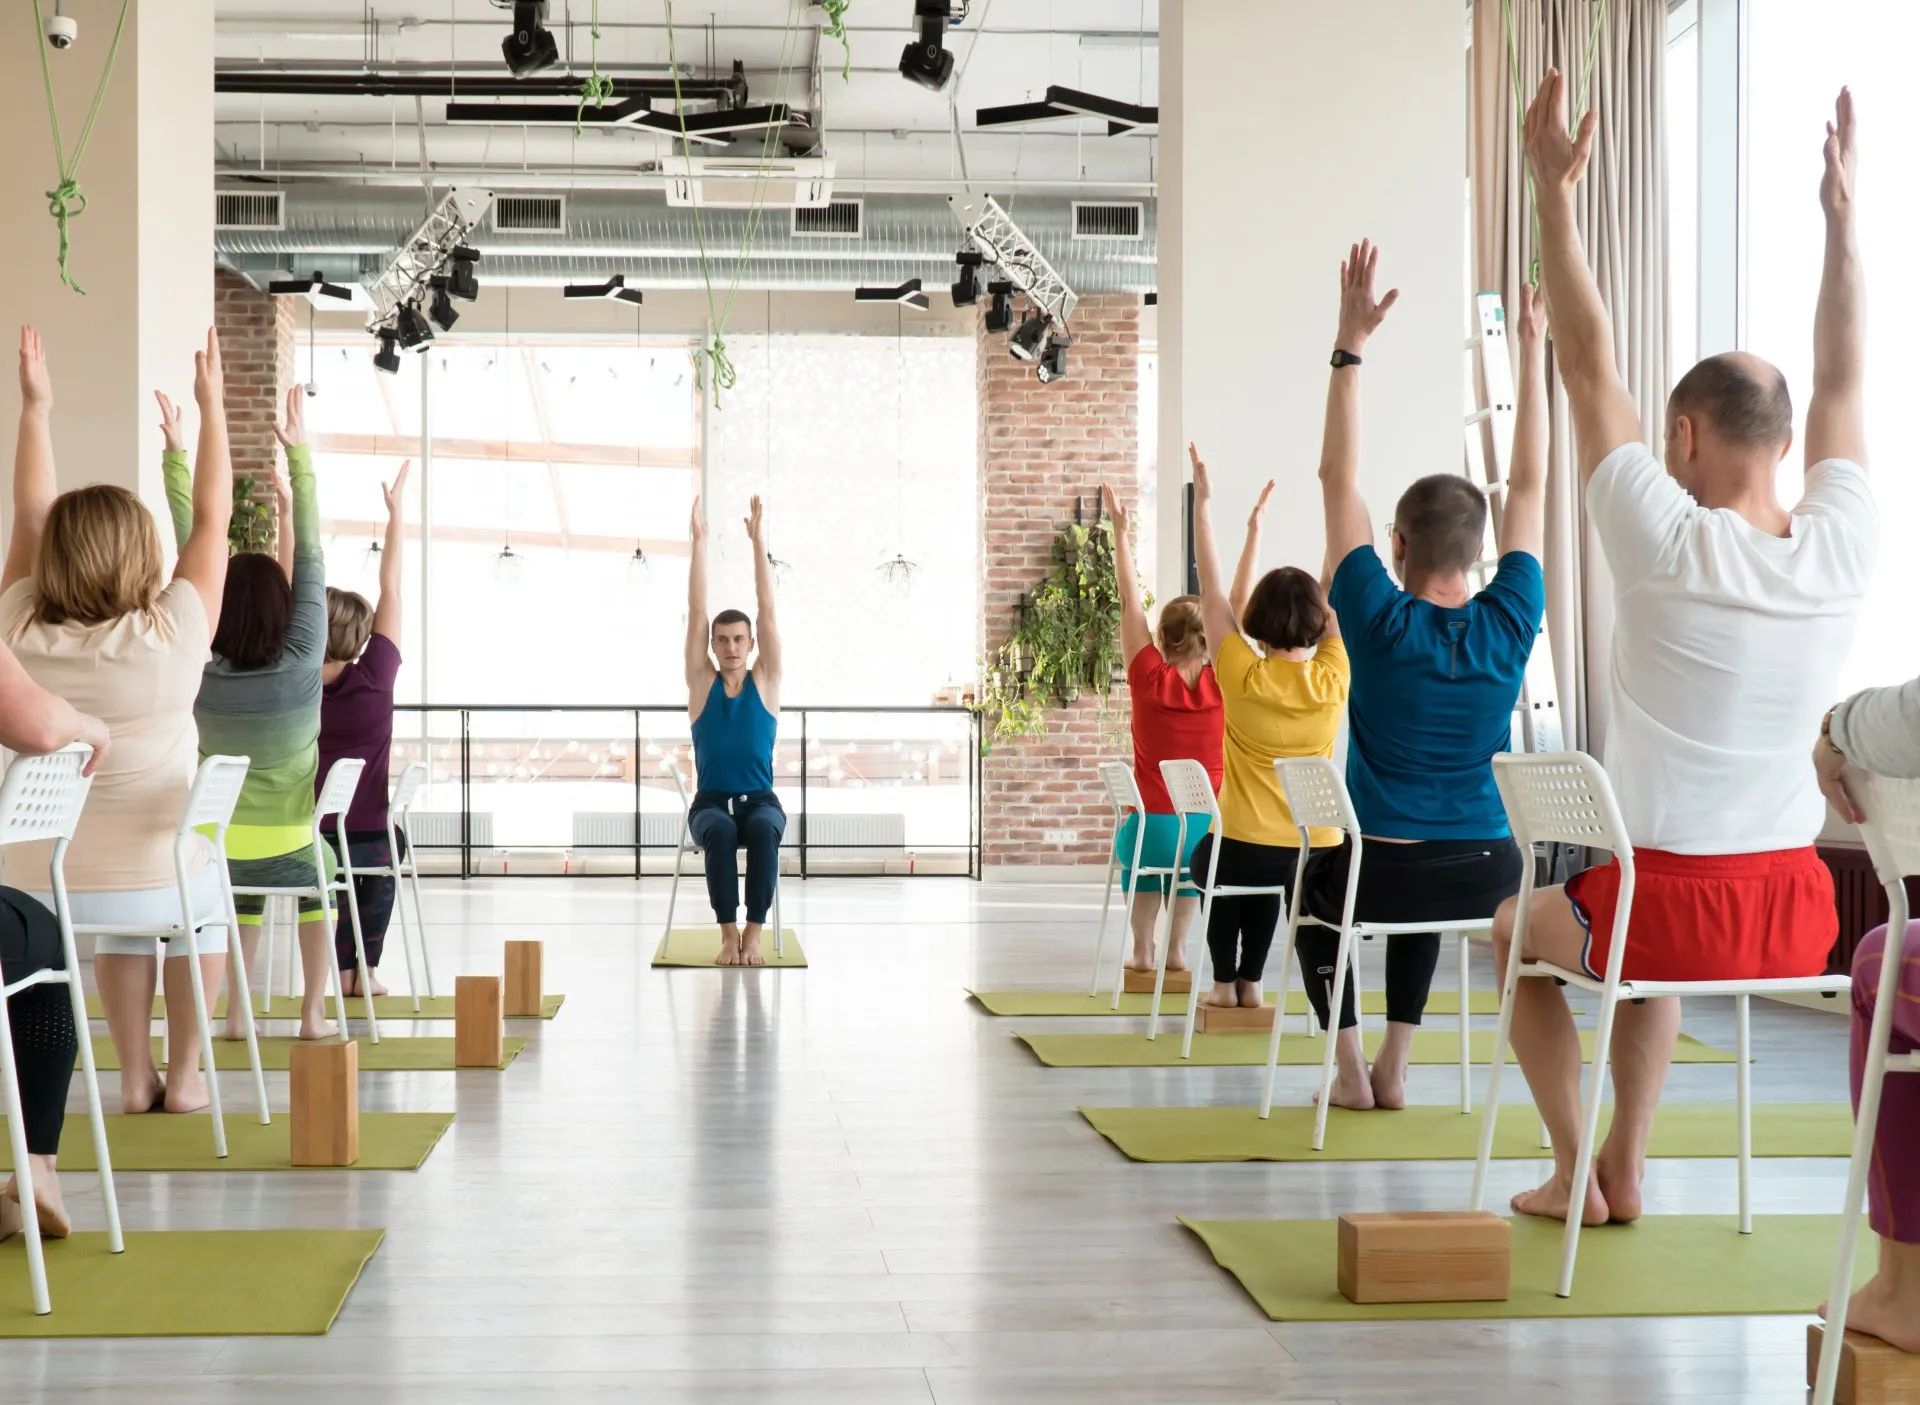 Chair yoga class for over-55s focusing on toning, balancing, stretching muscles, aligning bodies, and core strengthening while enjoying the experience